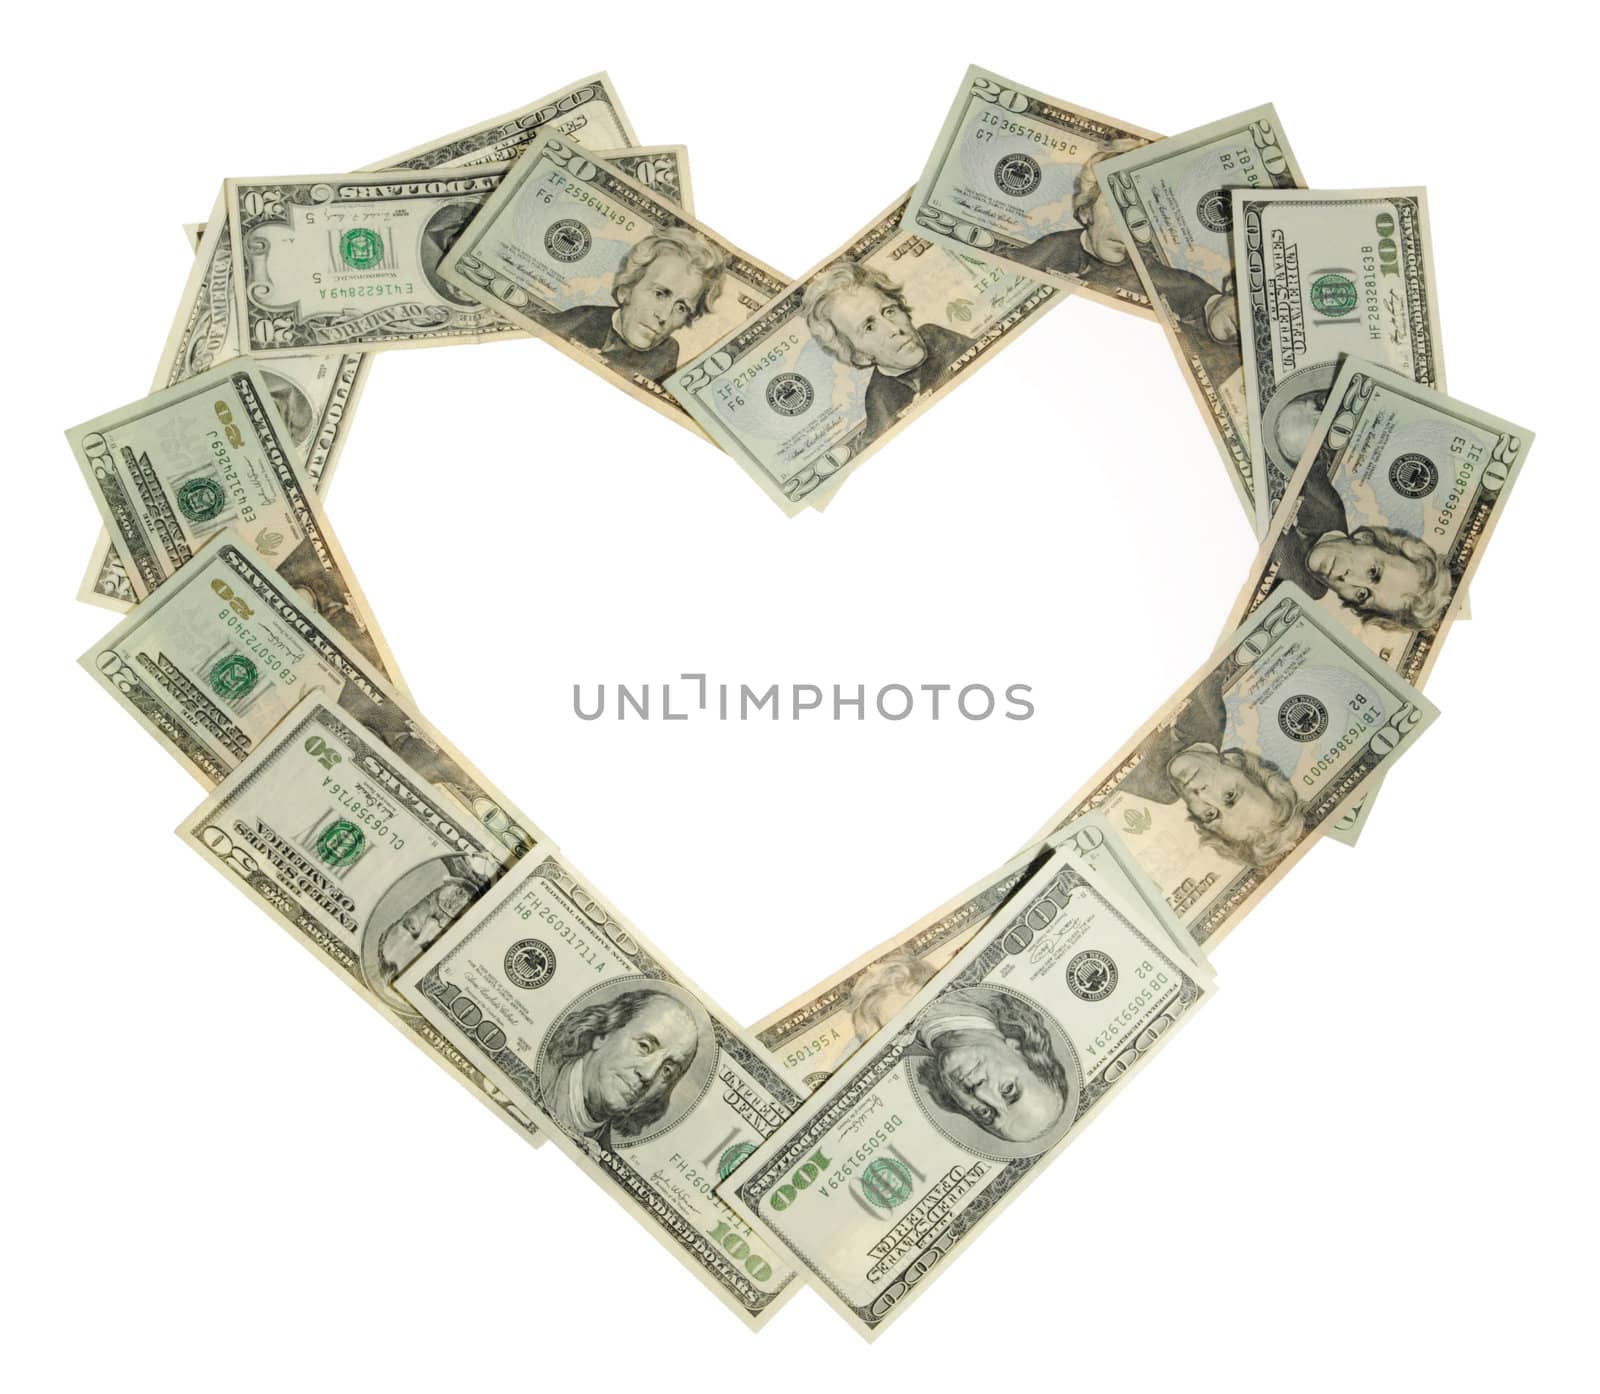 Heart of the money on the white background, to the day of Sainted Valentine
